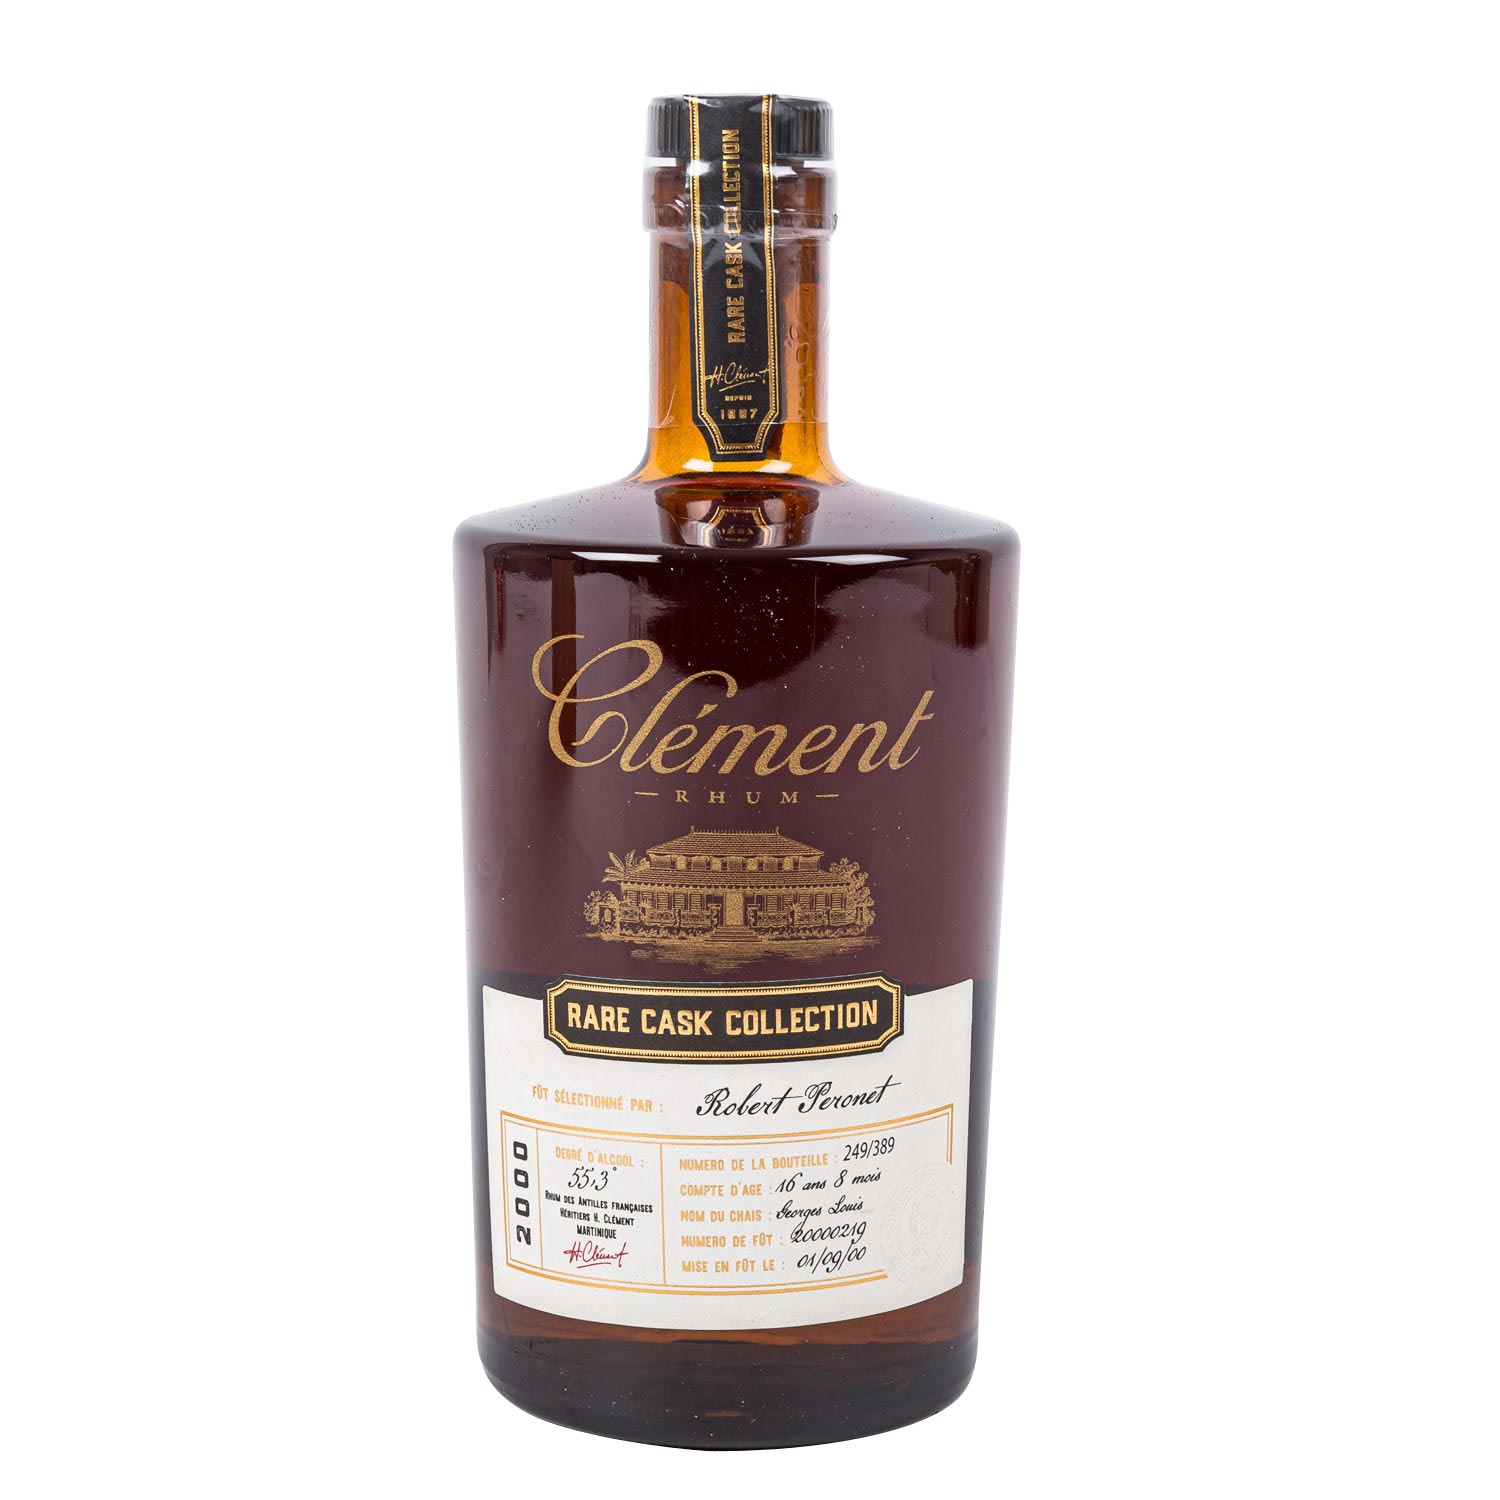 CLÉMENT "25 Years Old" Rare Cask Collection Rum - Image 3 of 7